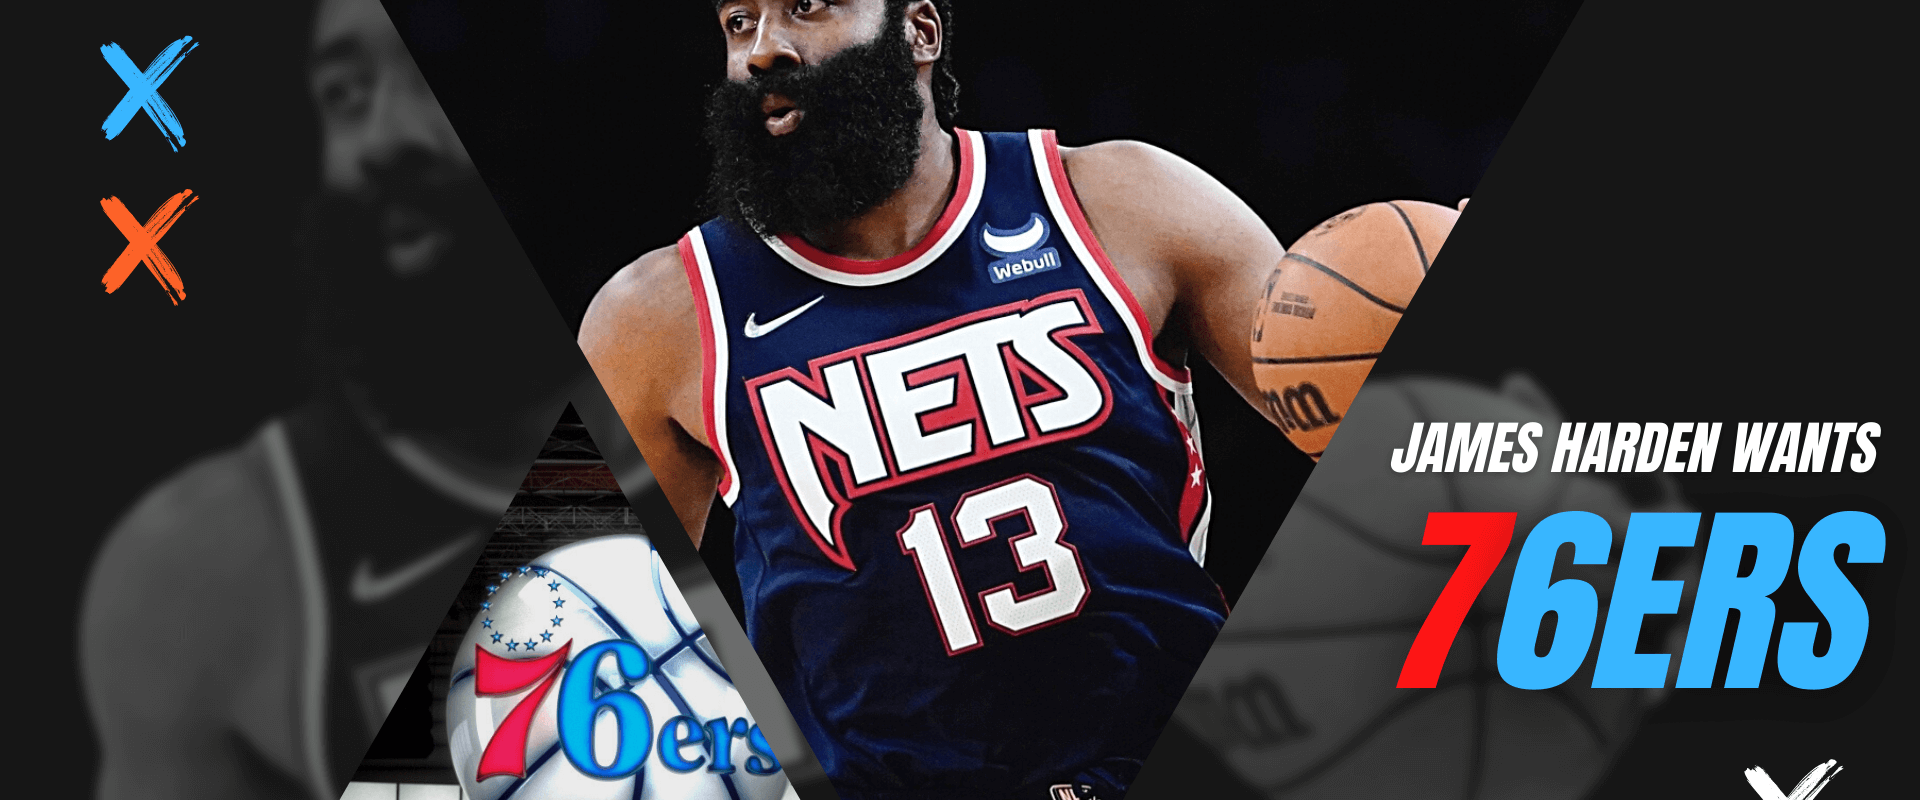 1920x1080_James Harden Wants to Leave for Philadelphia But Hesitates to Say Publicly-Ron2